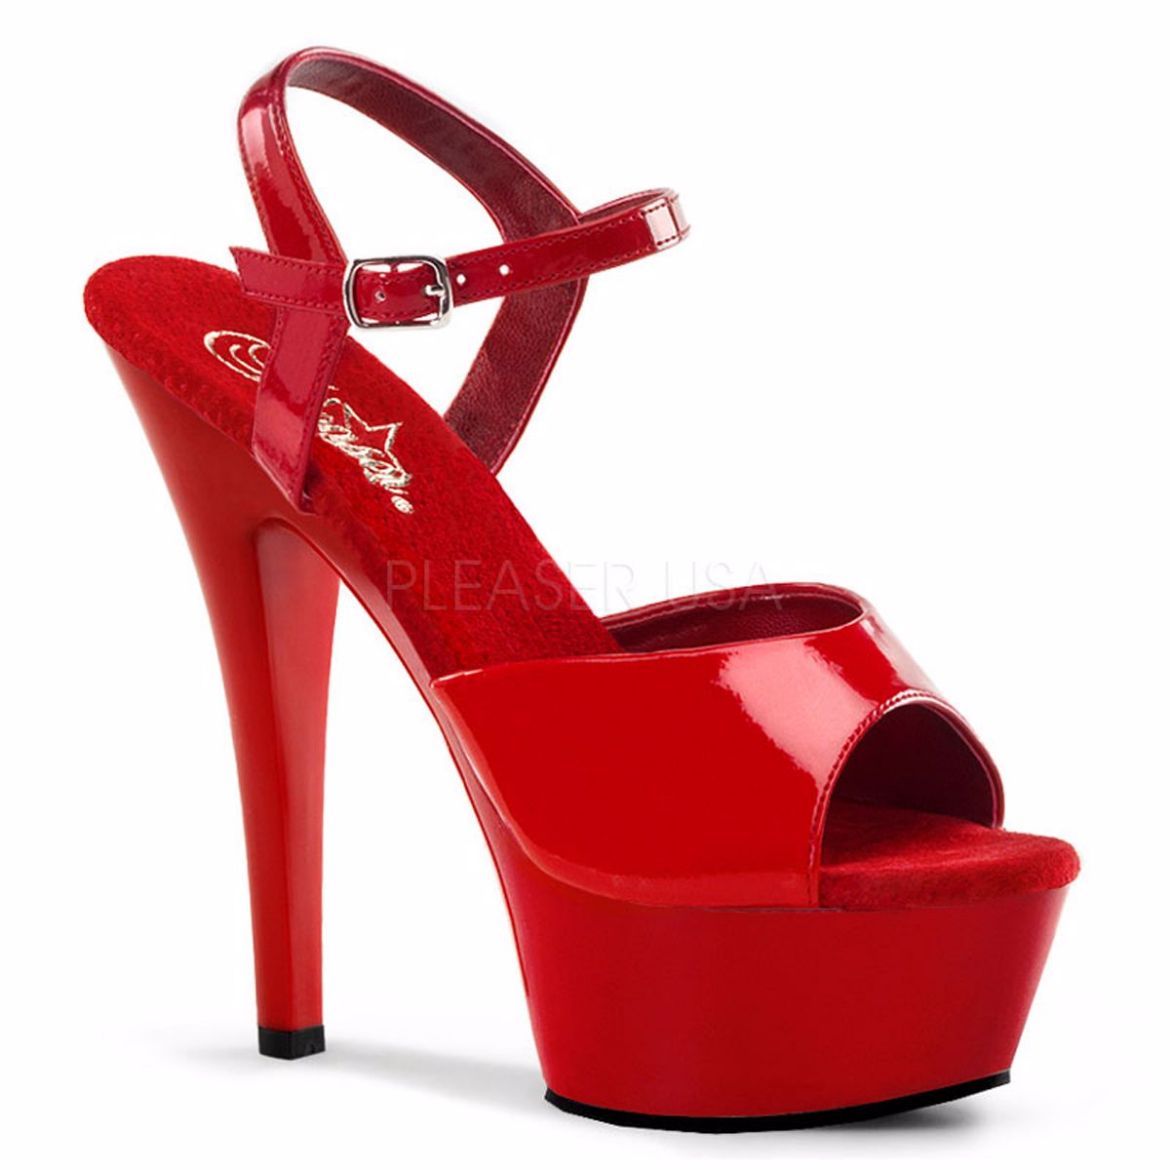 Product image of Pleaser Kiss-209 Red Patent/Red, 6 inch (15.2 cm) Heel, 1 3/4 inch (4.4 cm) Platform Sandal Shoes